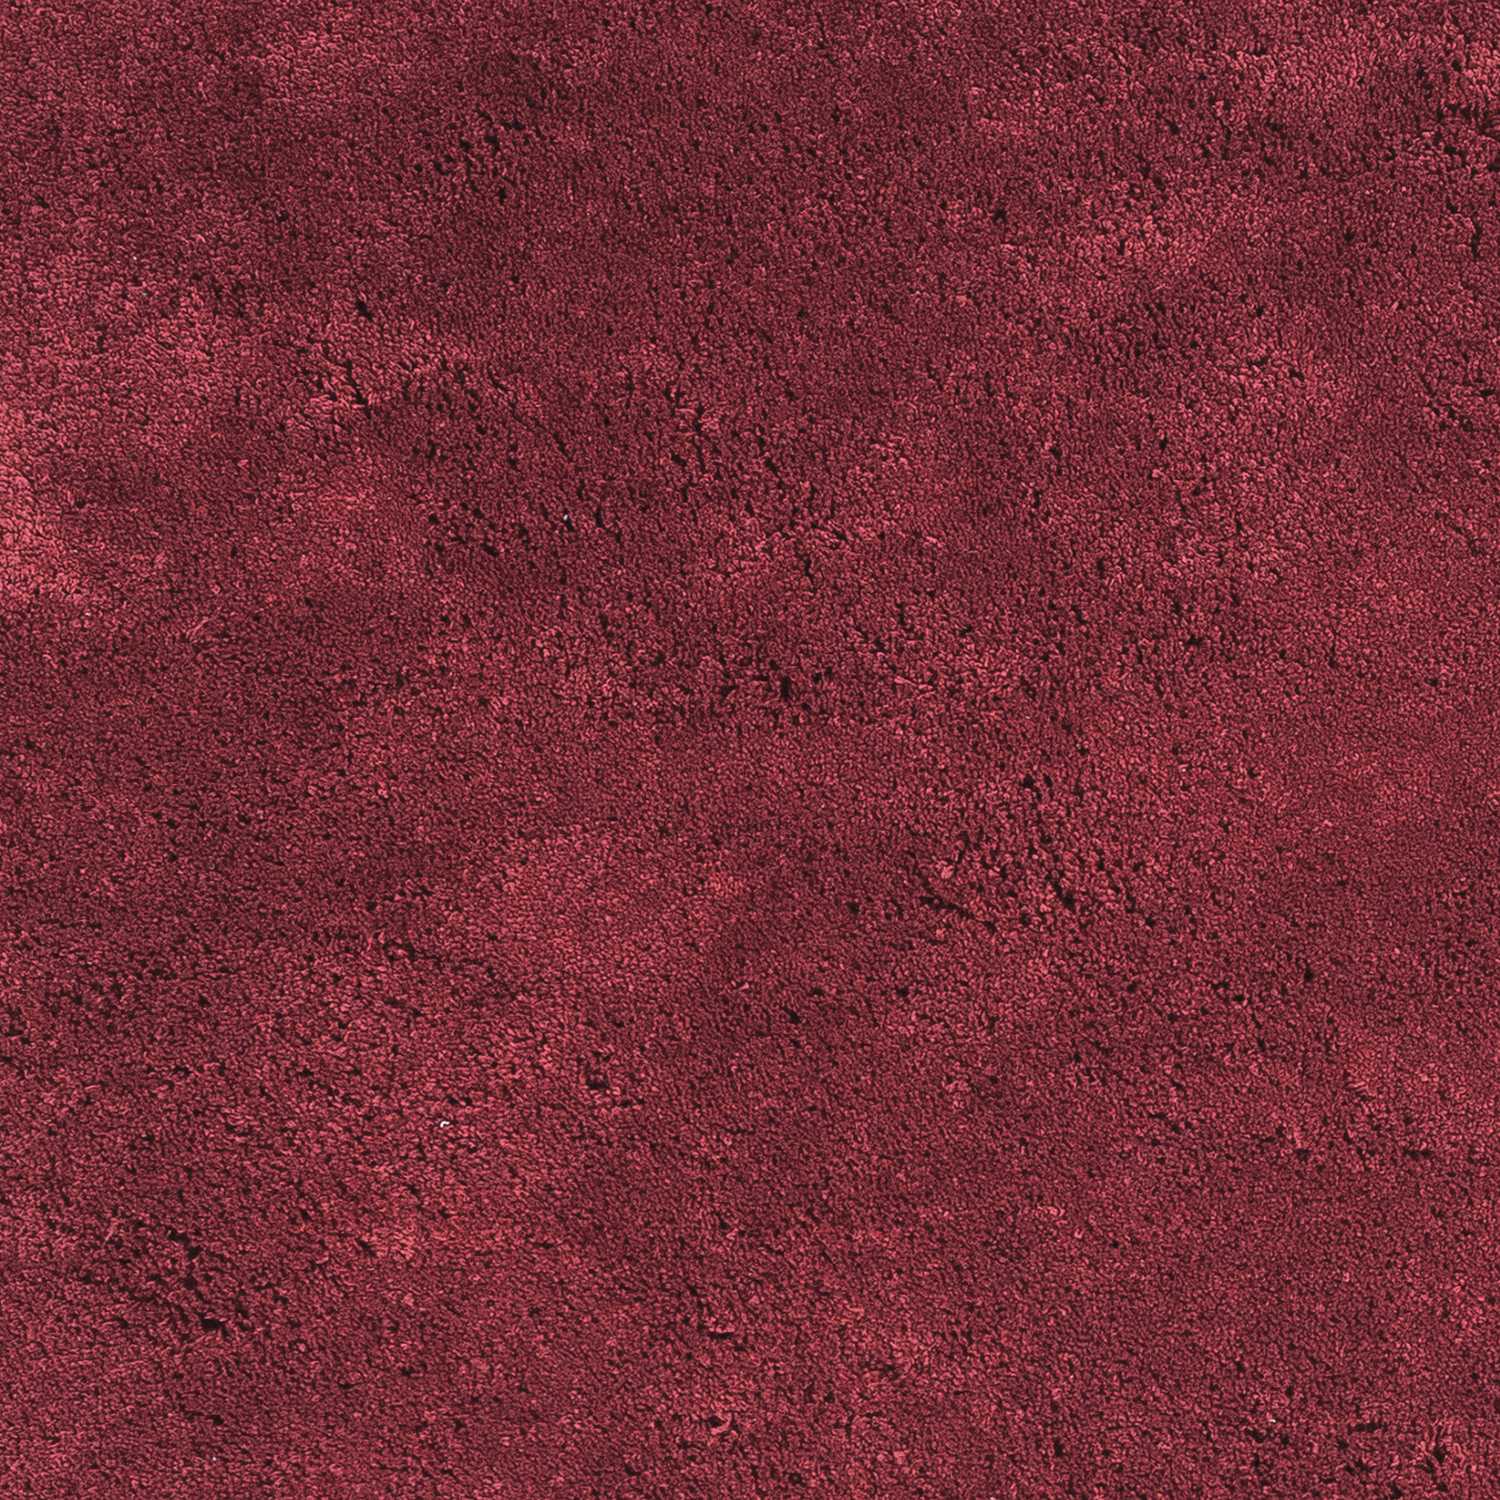 8' x 10' Polyester Red Area Rug